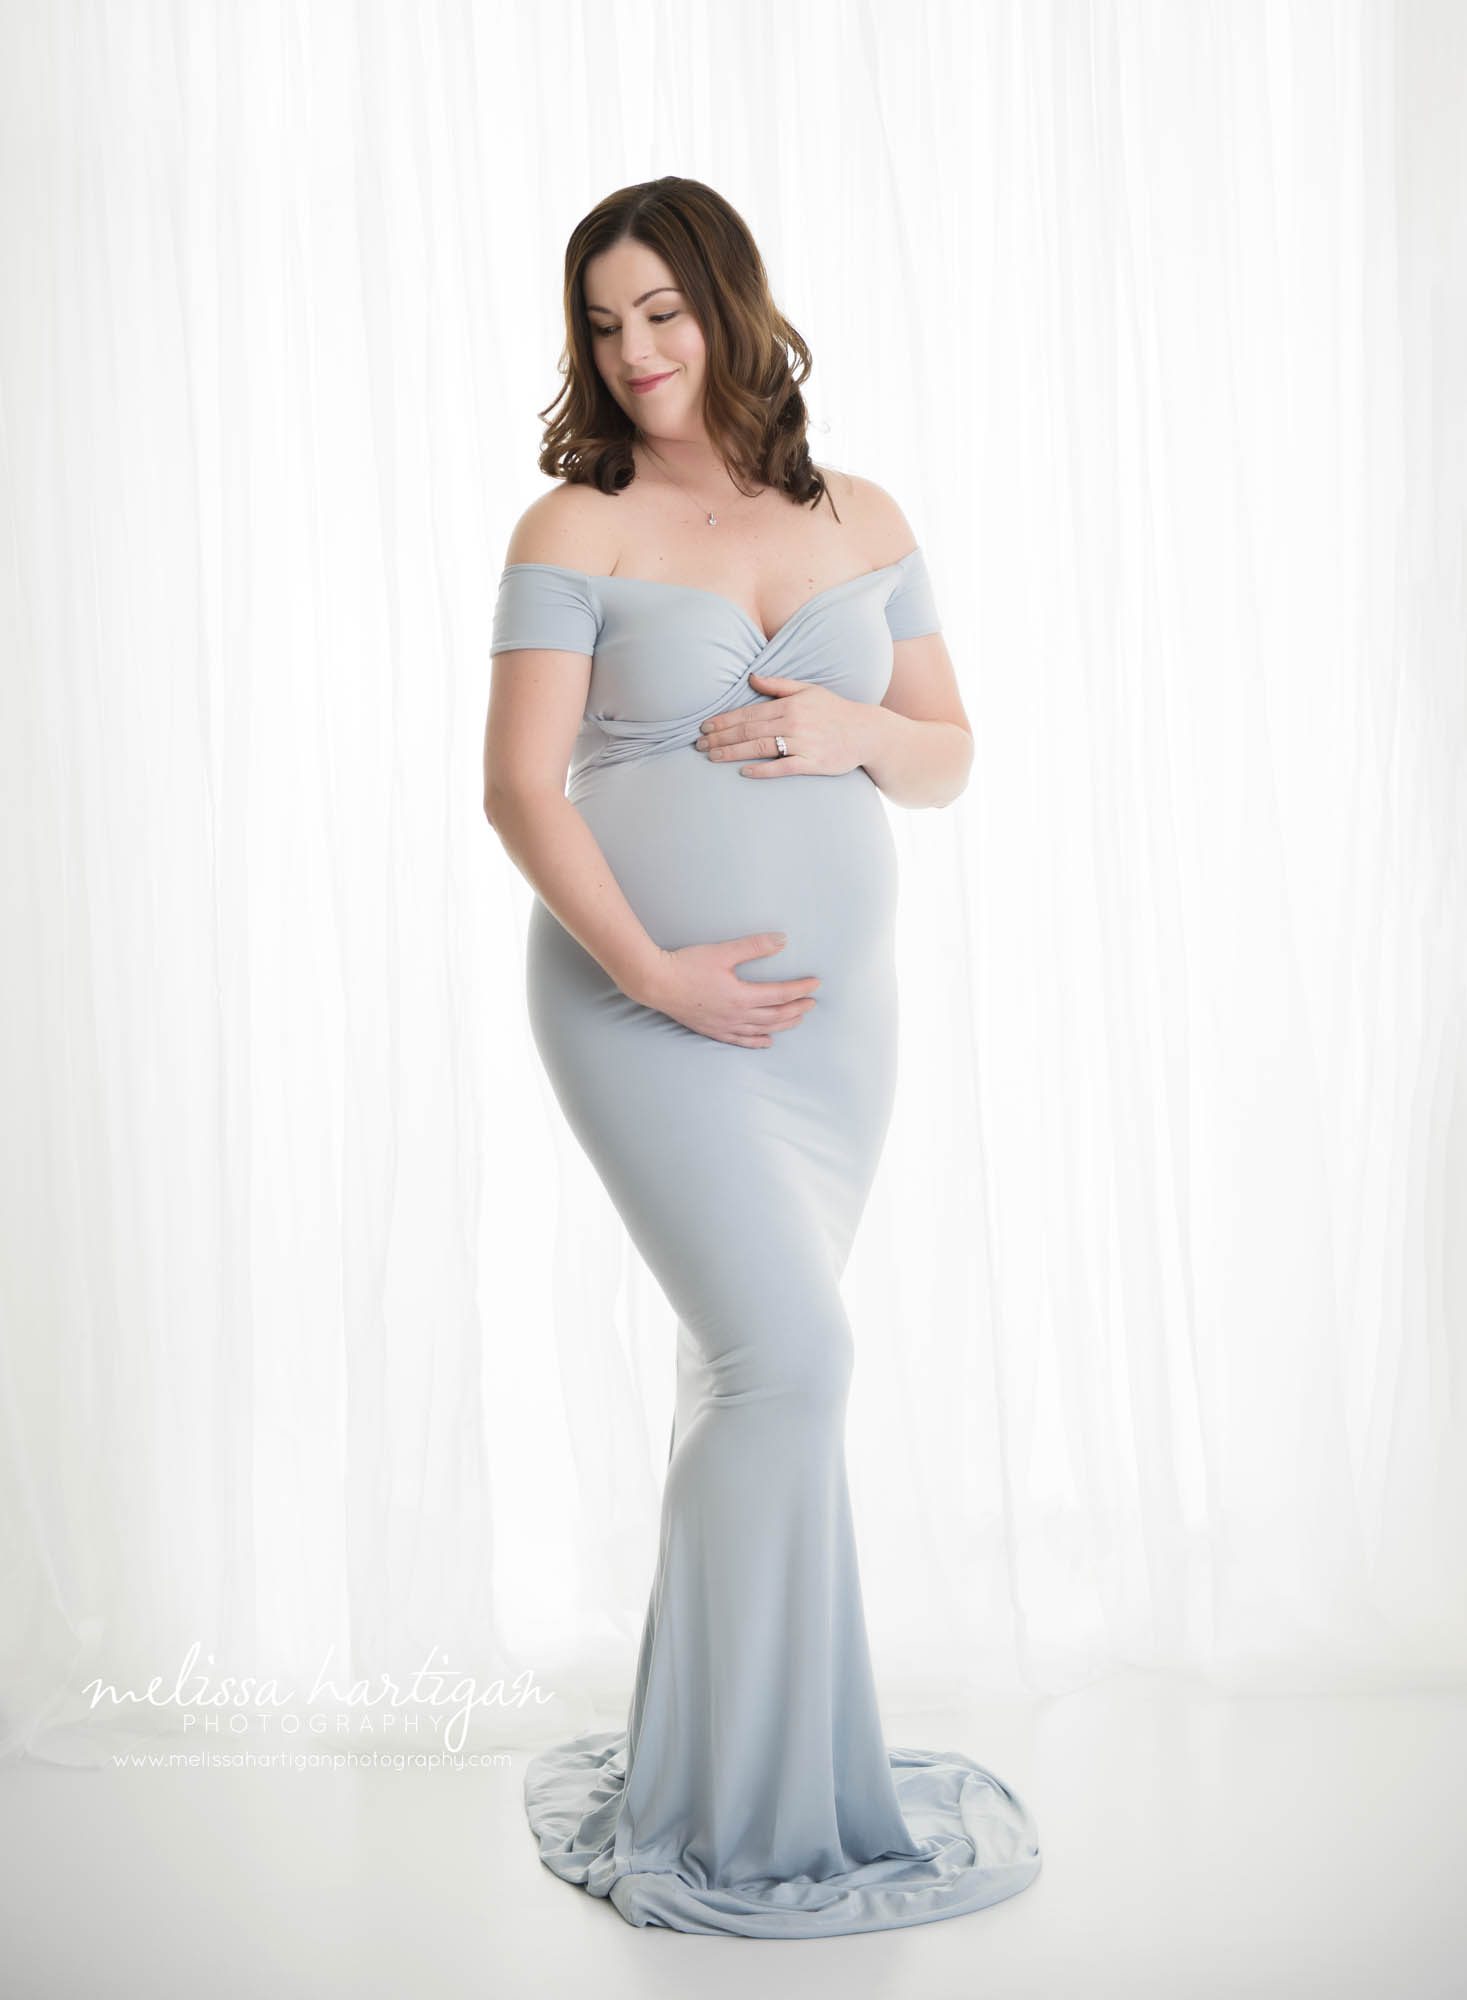 expectant mom standing holding baby bump wearing long form fitted blue dress against white backdrop